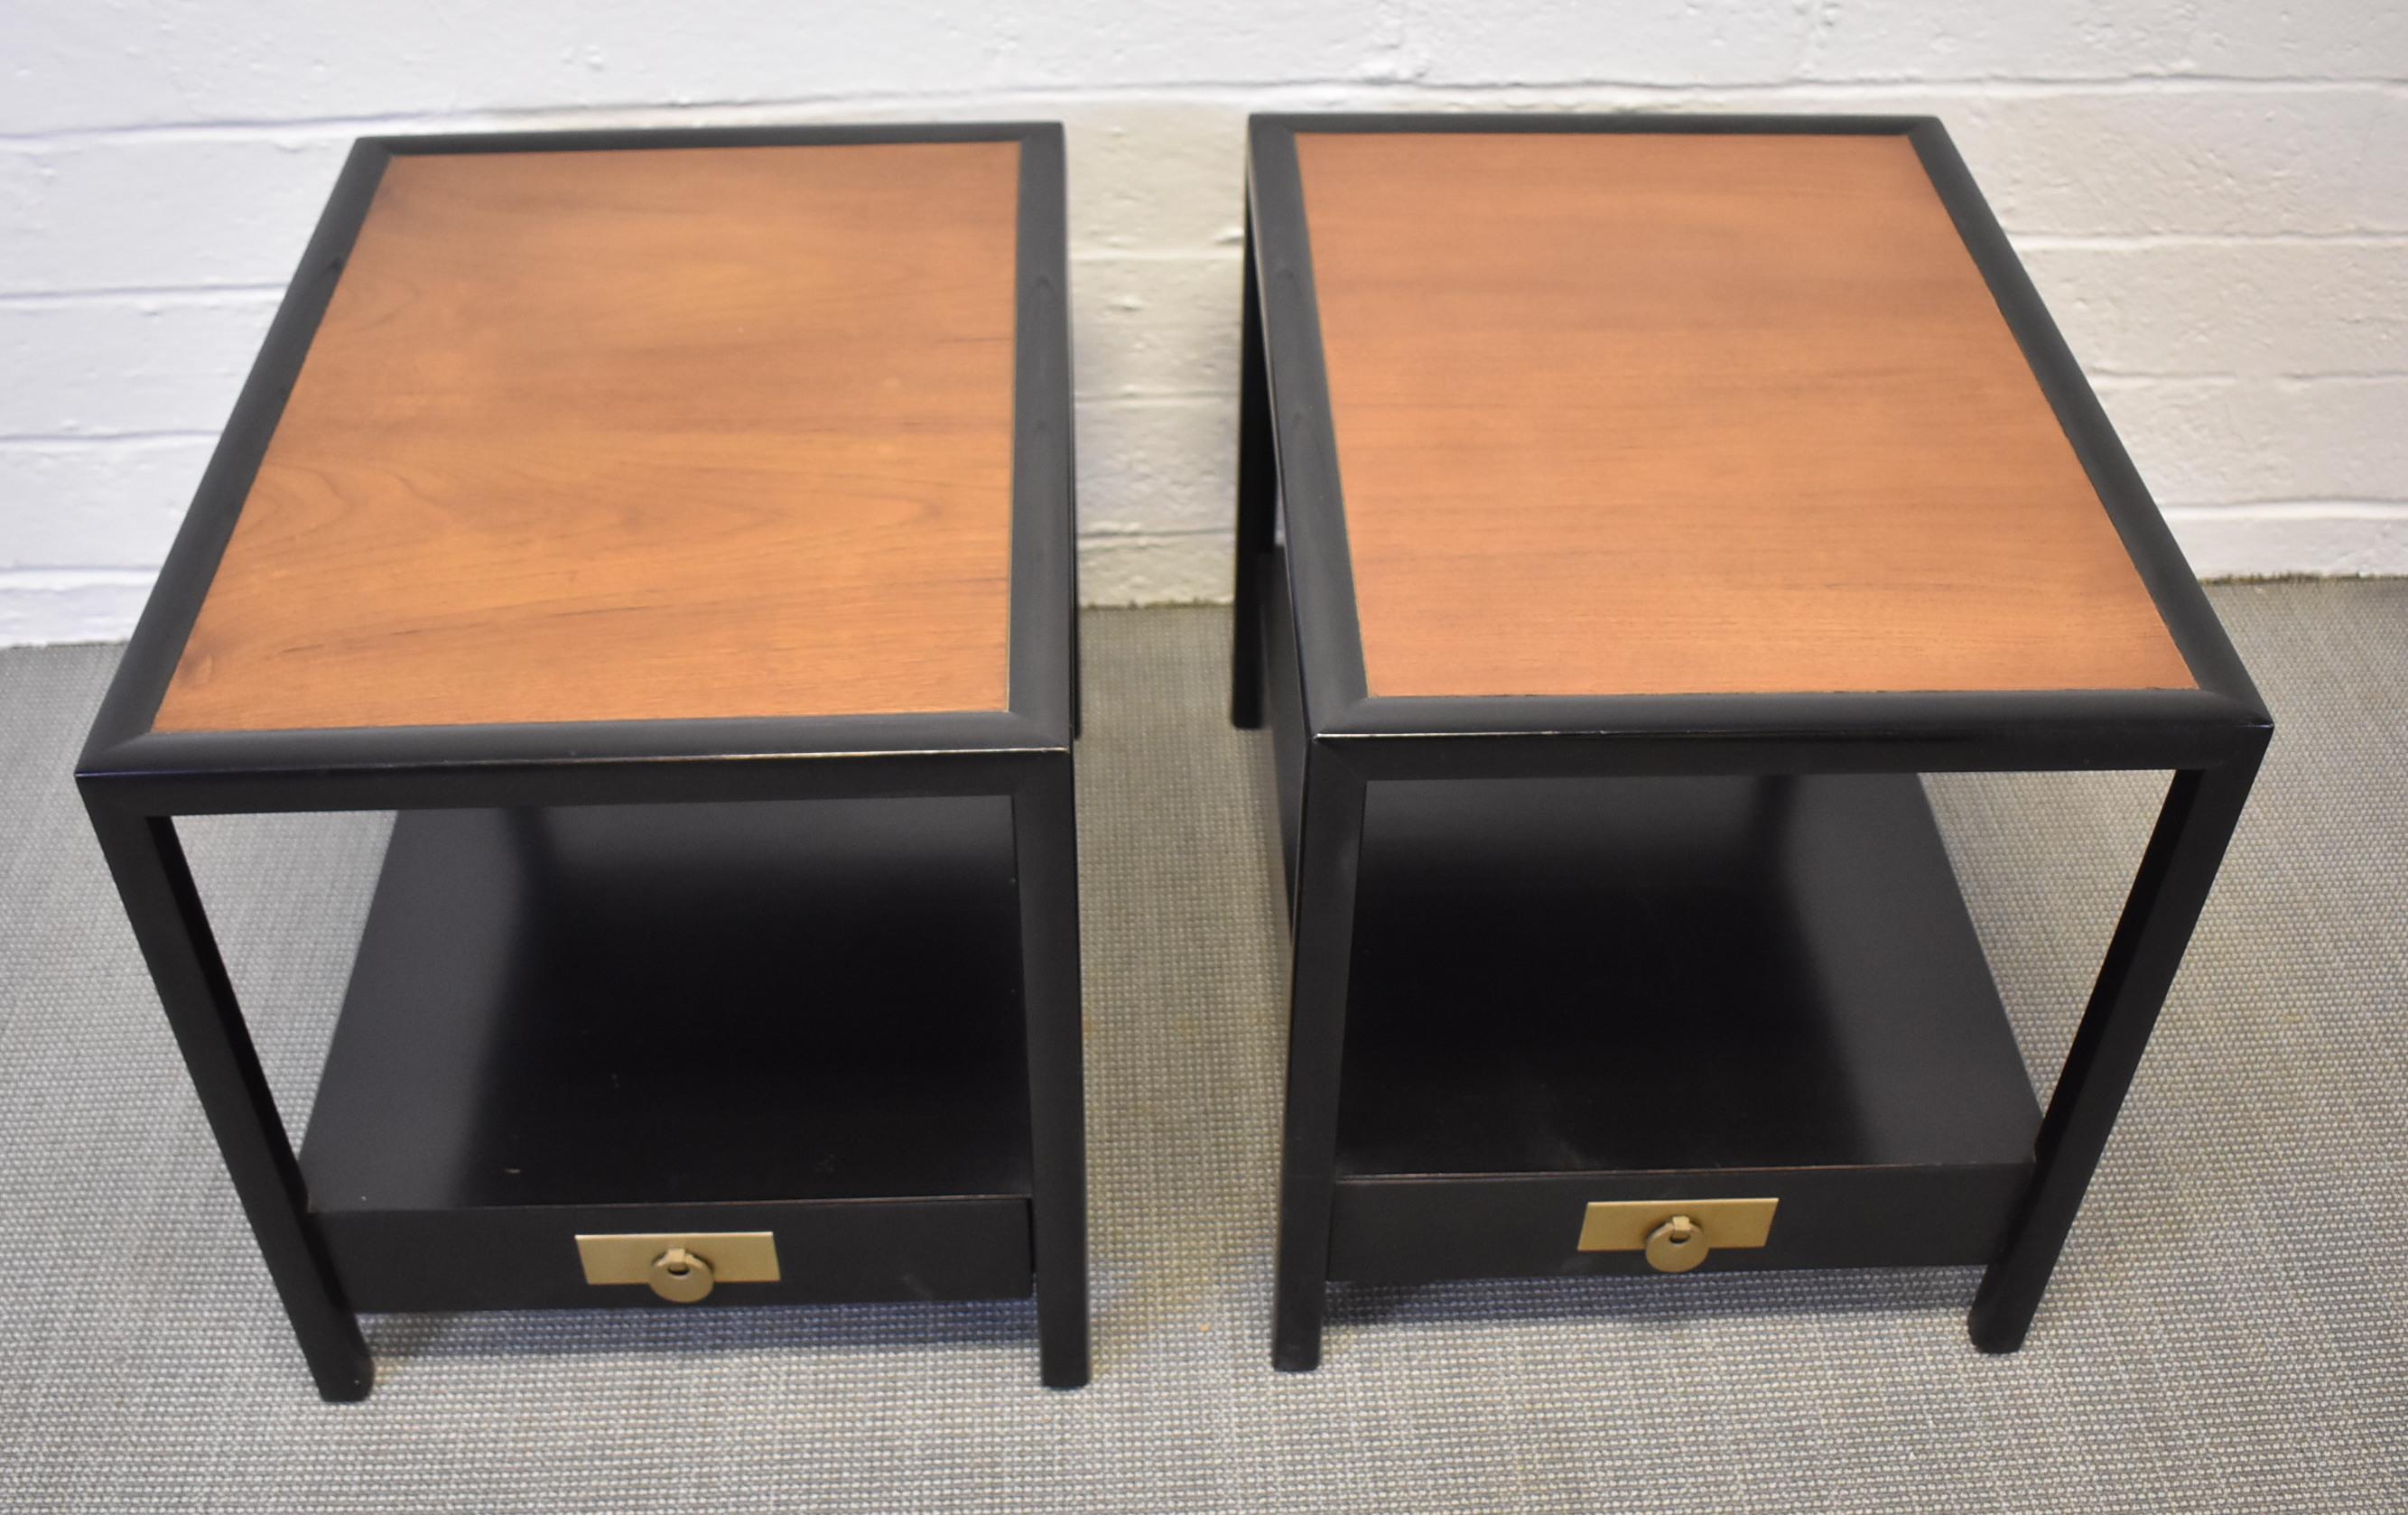 Pair of baker furniture Hollywood Regency end tables by Michael Taylor. Circa 1950's Mid-Century Modern Style. They each feature natural mahogany wood construction and drawers with original ebonized finish and brass hardware. Excellent vintage